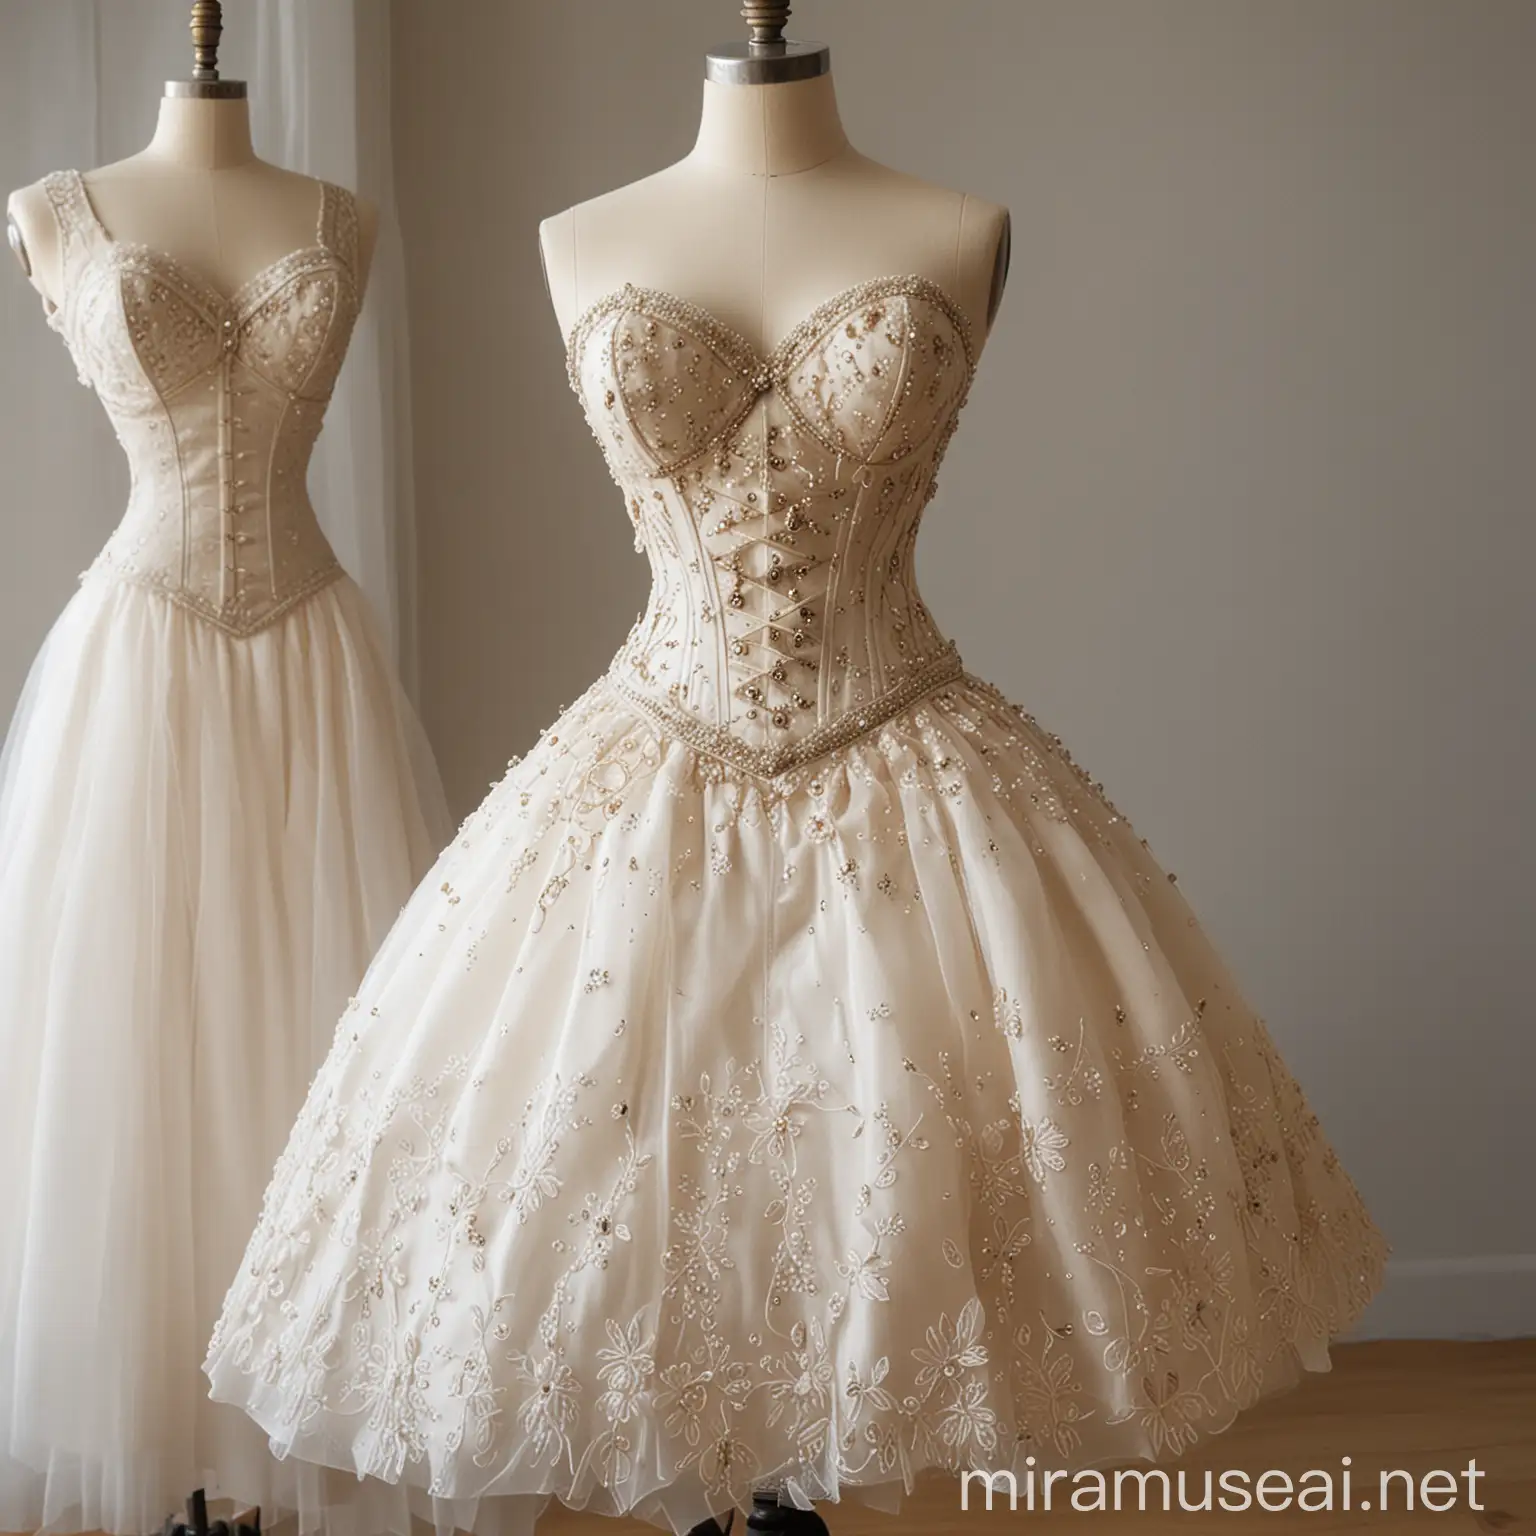 A Quinceañera dress on a mannequin, is in a fashion studio with sewing tools and a sewing machine near. The dress is white, has a corset with cups and bones visible, in tulle transparency, with embroidered tulle with stones. The skirt is double trumpet plate with 4 layers of glitter tulle with lining in Italian silk. It has embroidered tulle with stone applications on the waist and down the skirt.